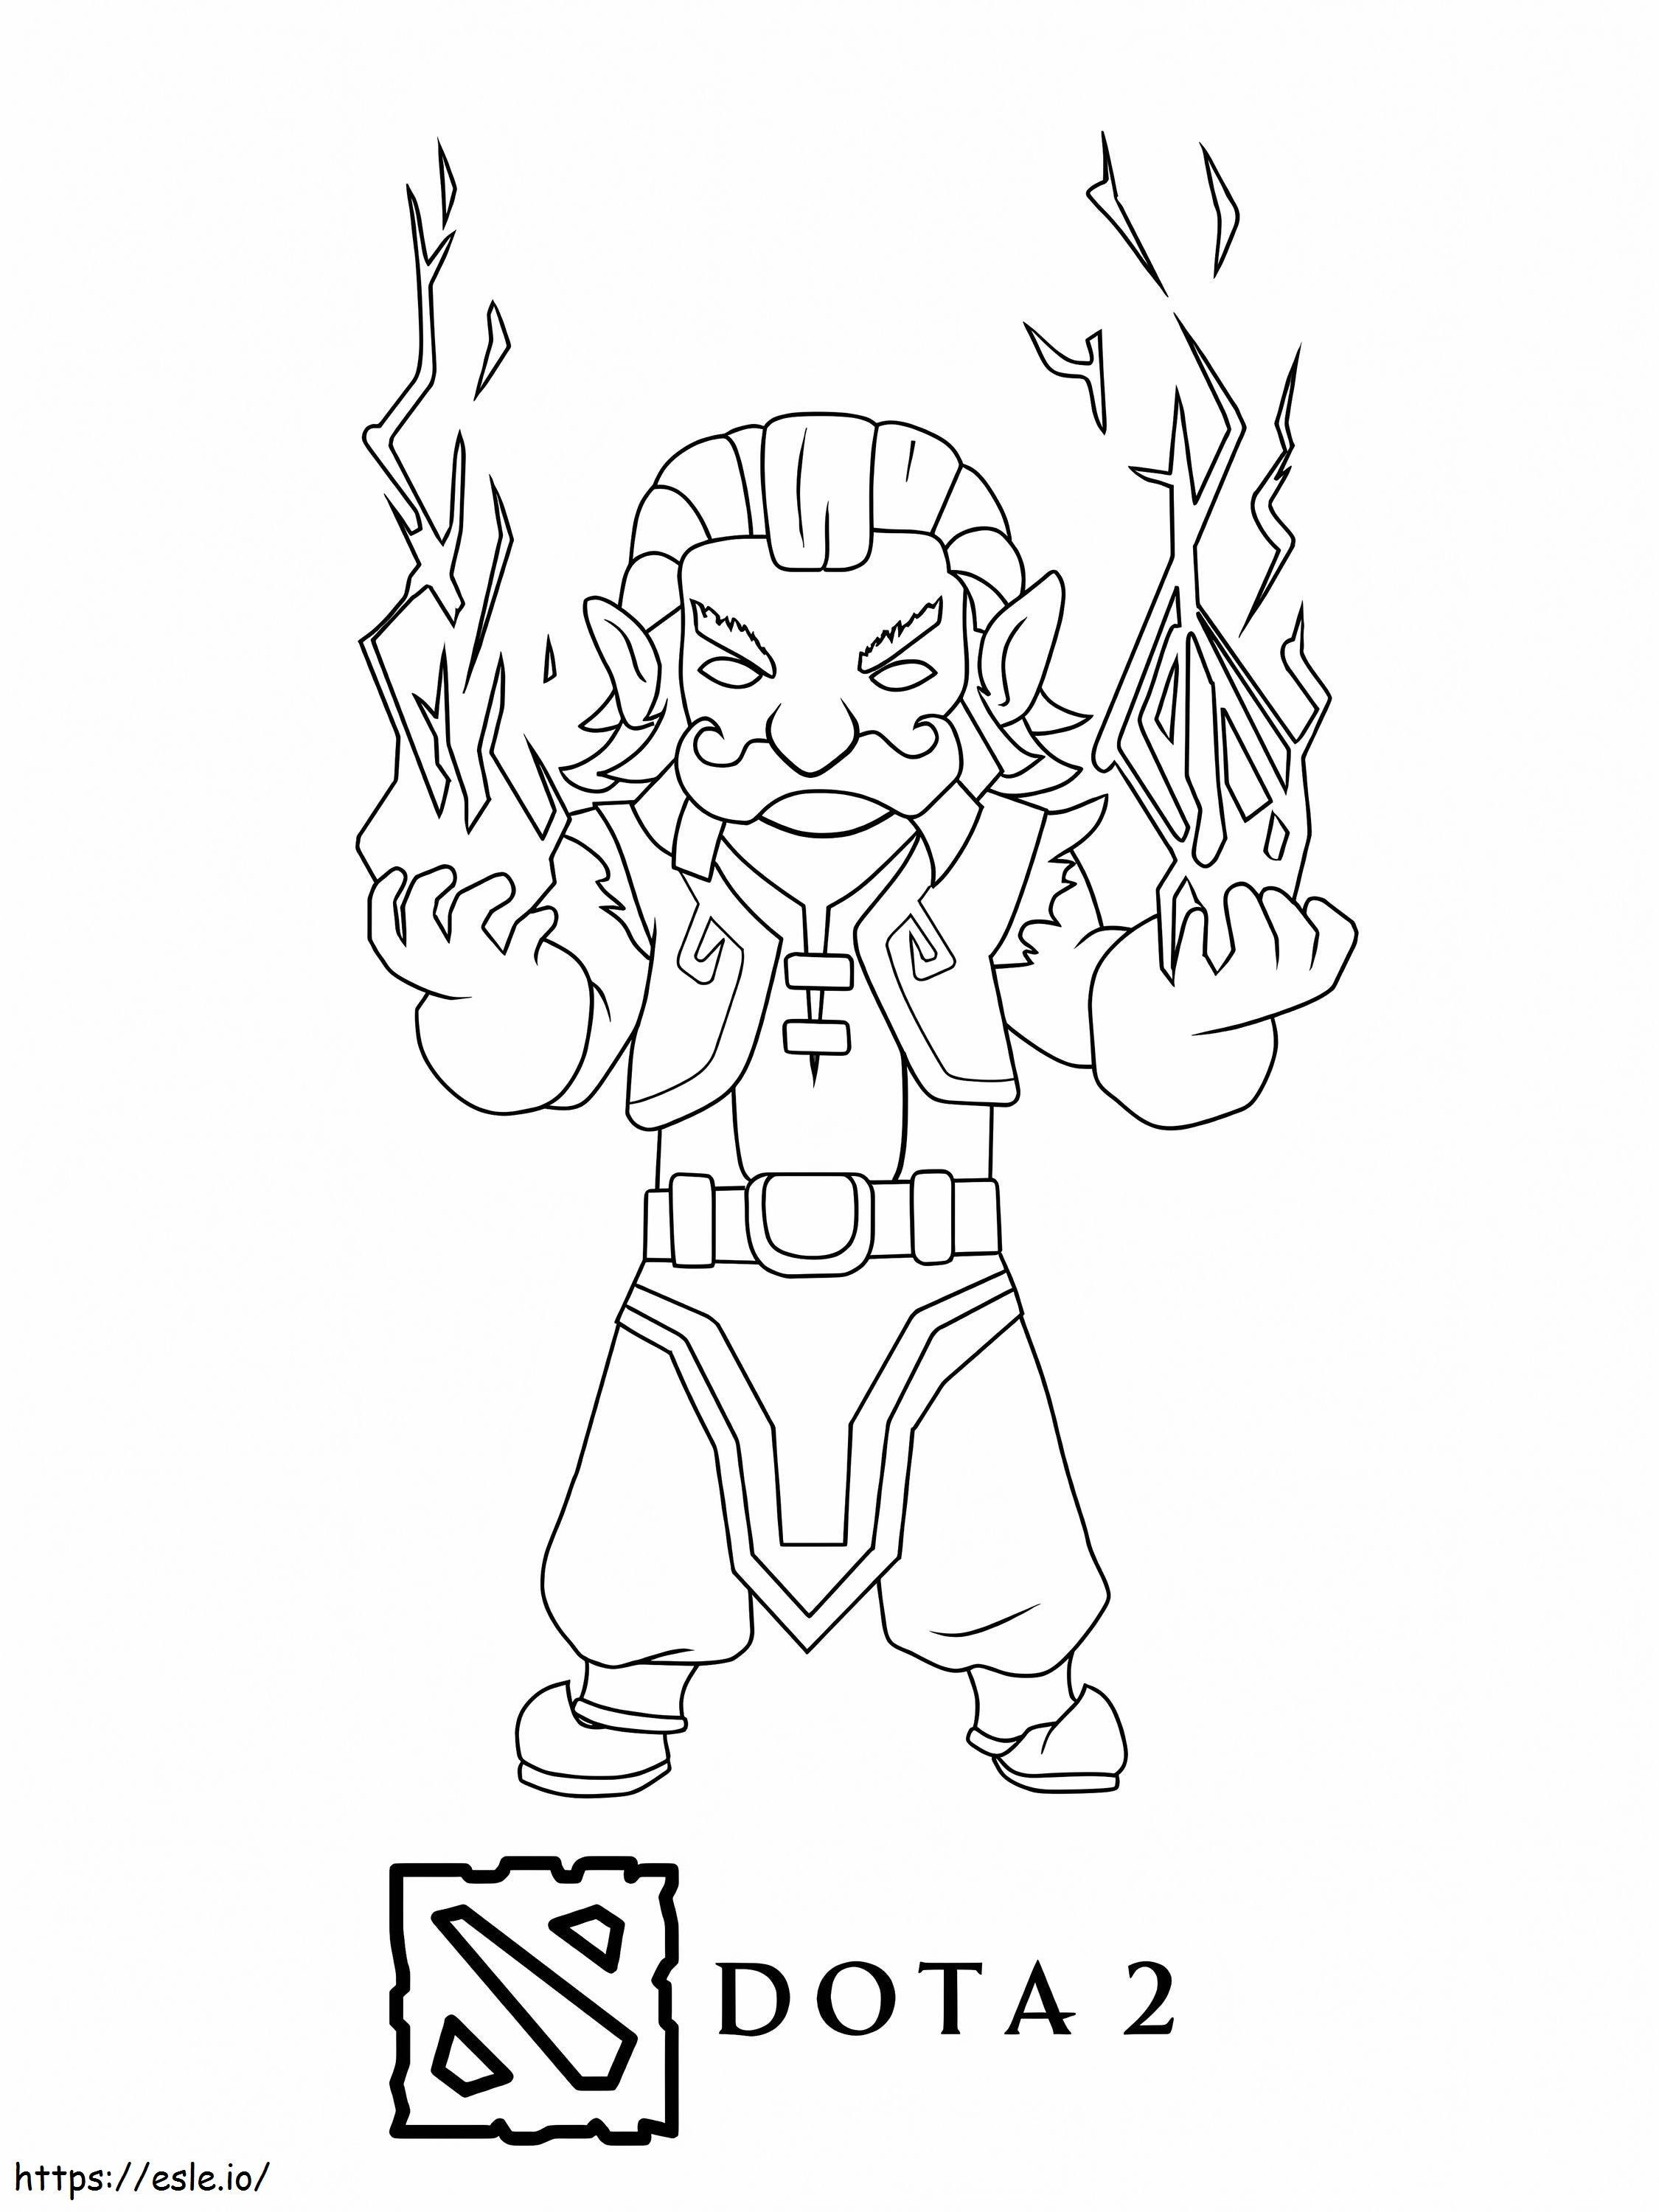 1592010865 Thrysreaet coloring page